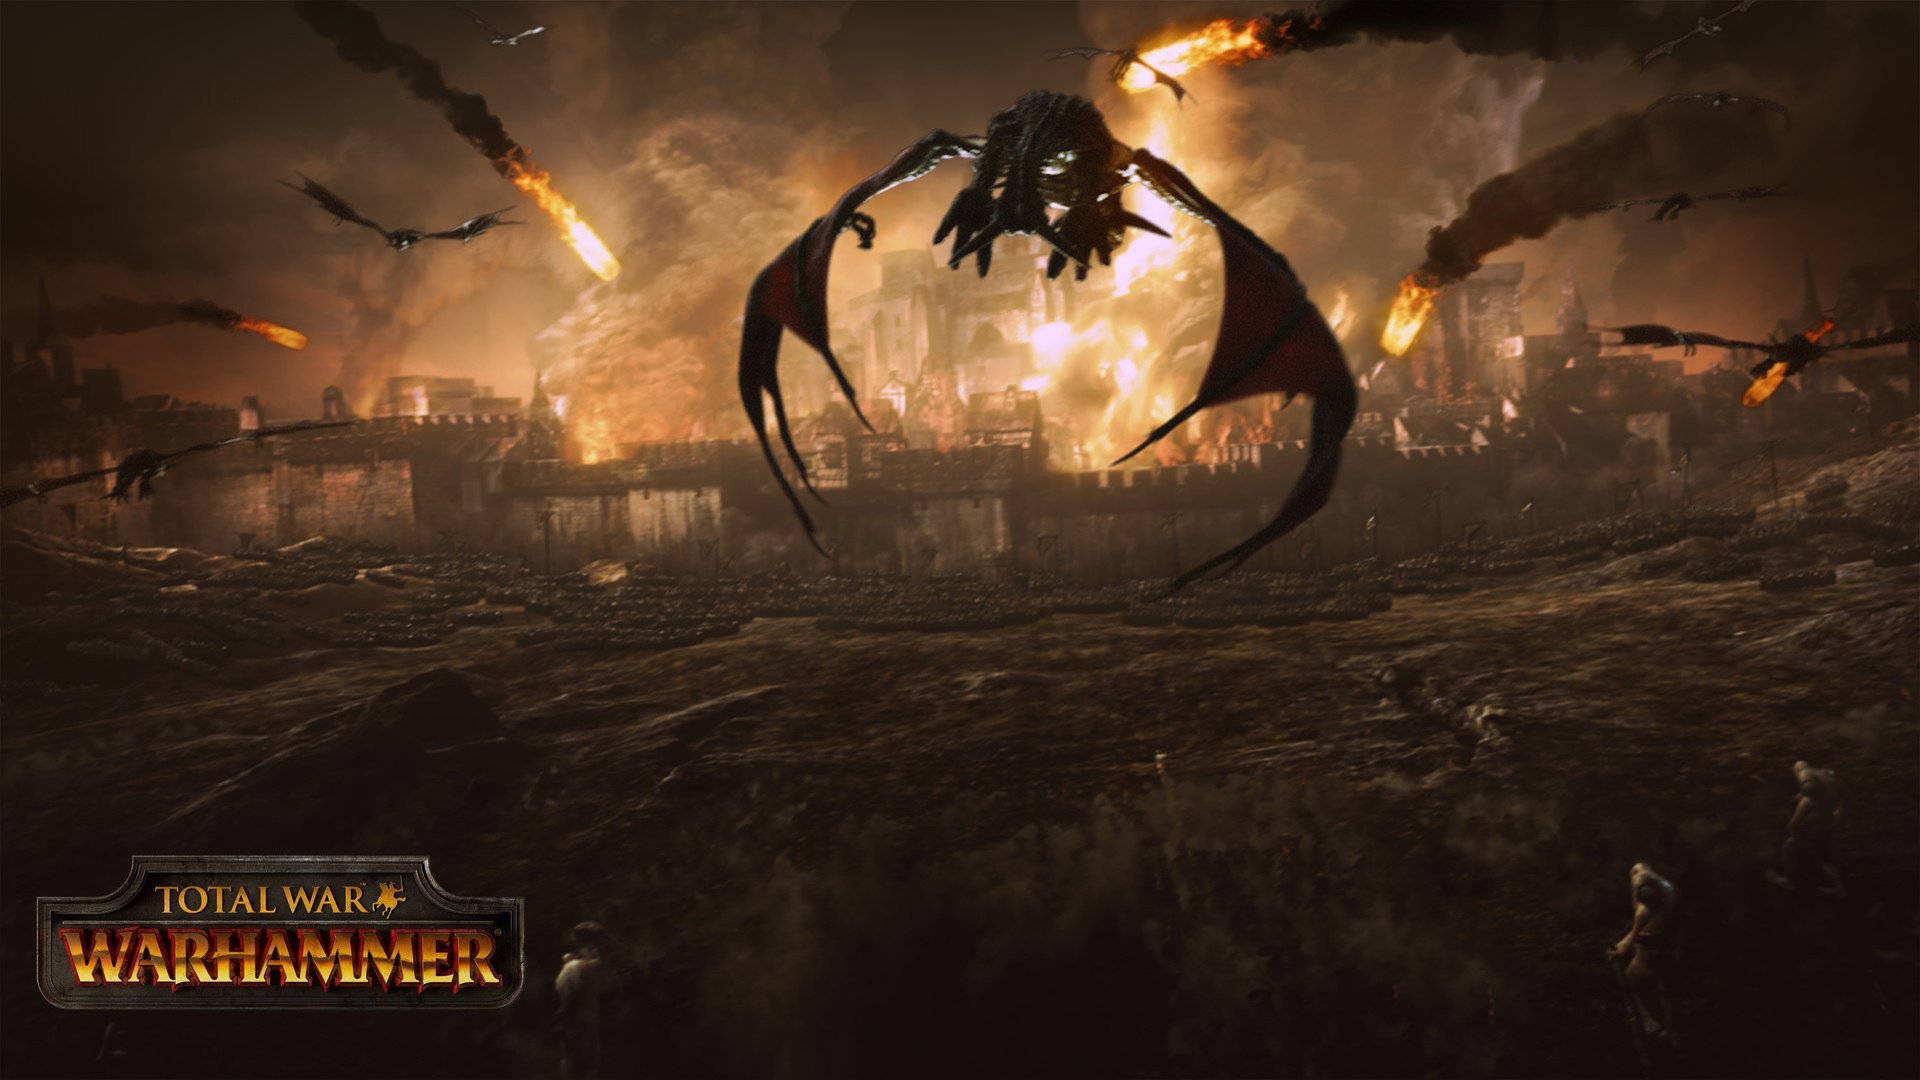  total war warhammer wallpapers games wallpapers pc games wallpapers